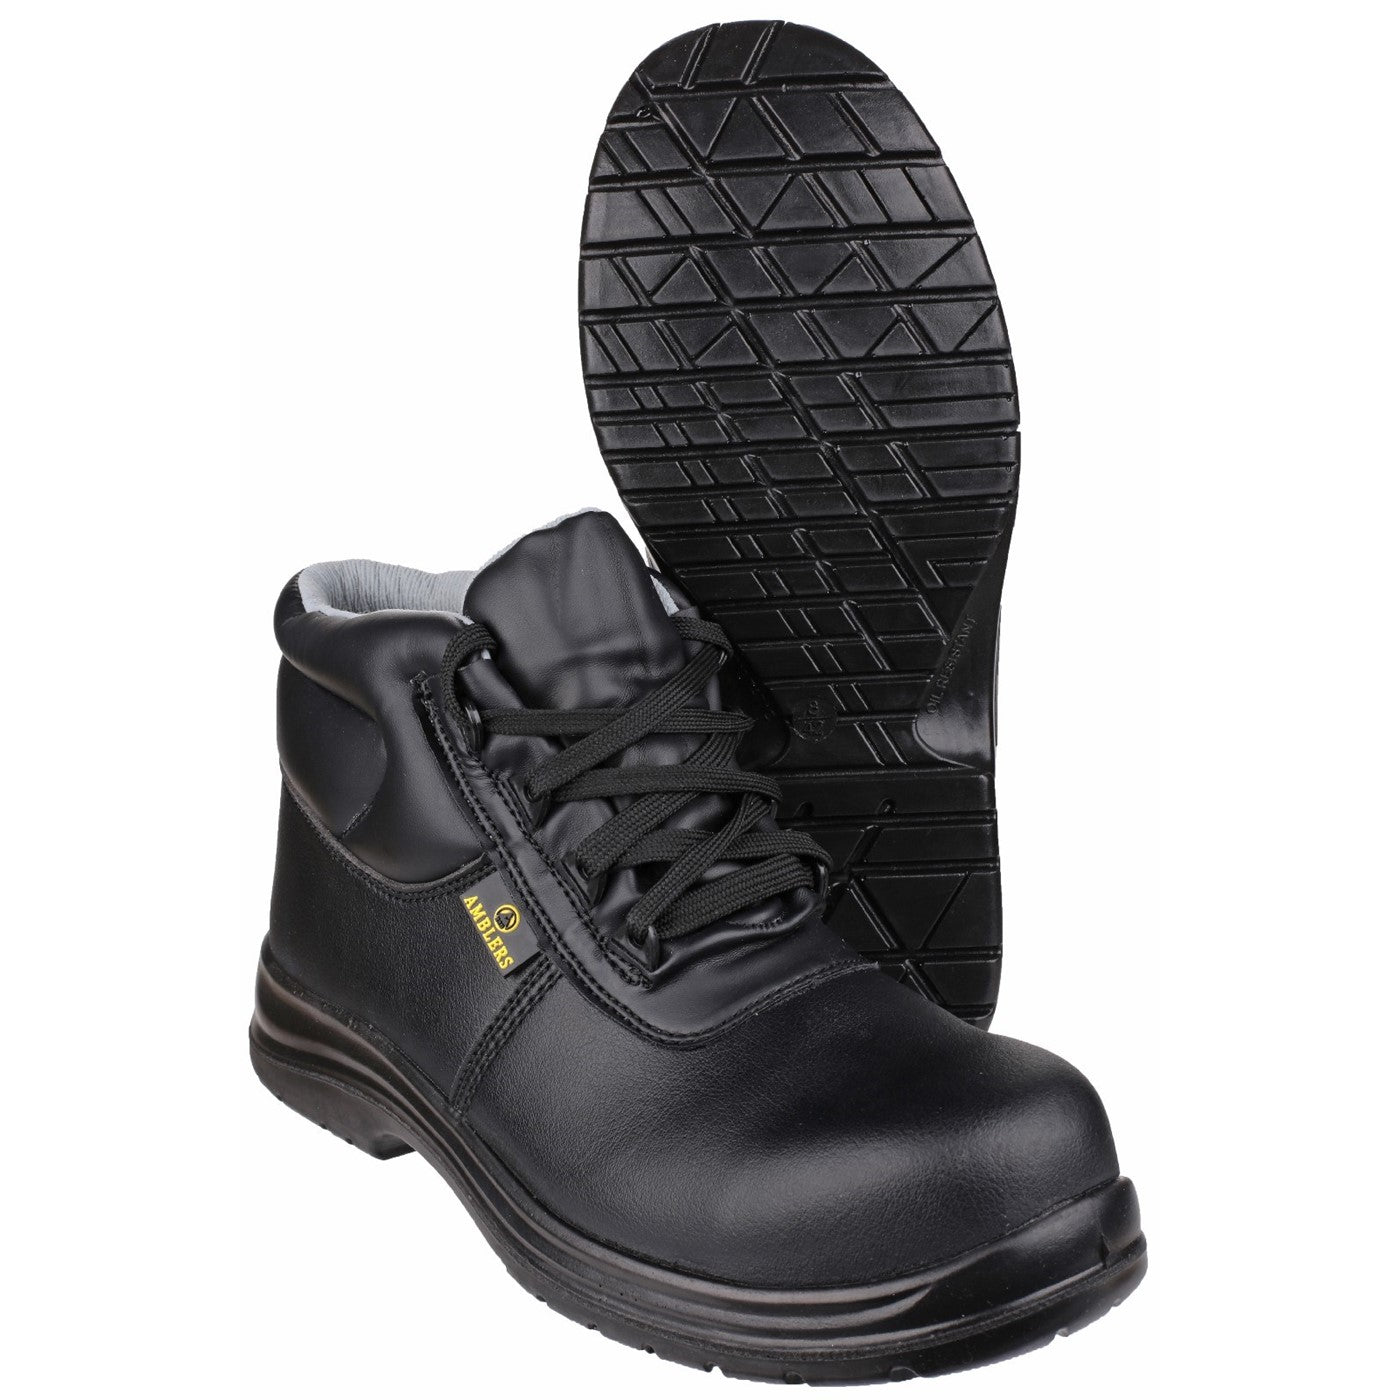 Unisex Amblers Safety FS663 Safety Boot